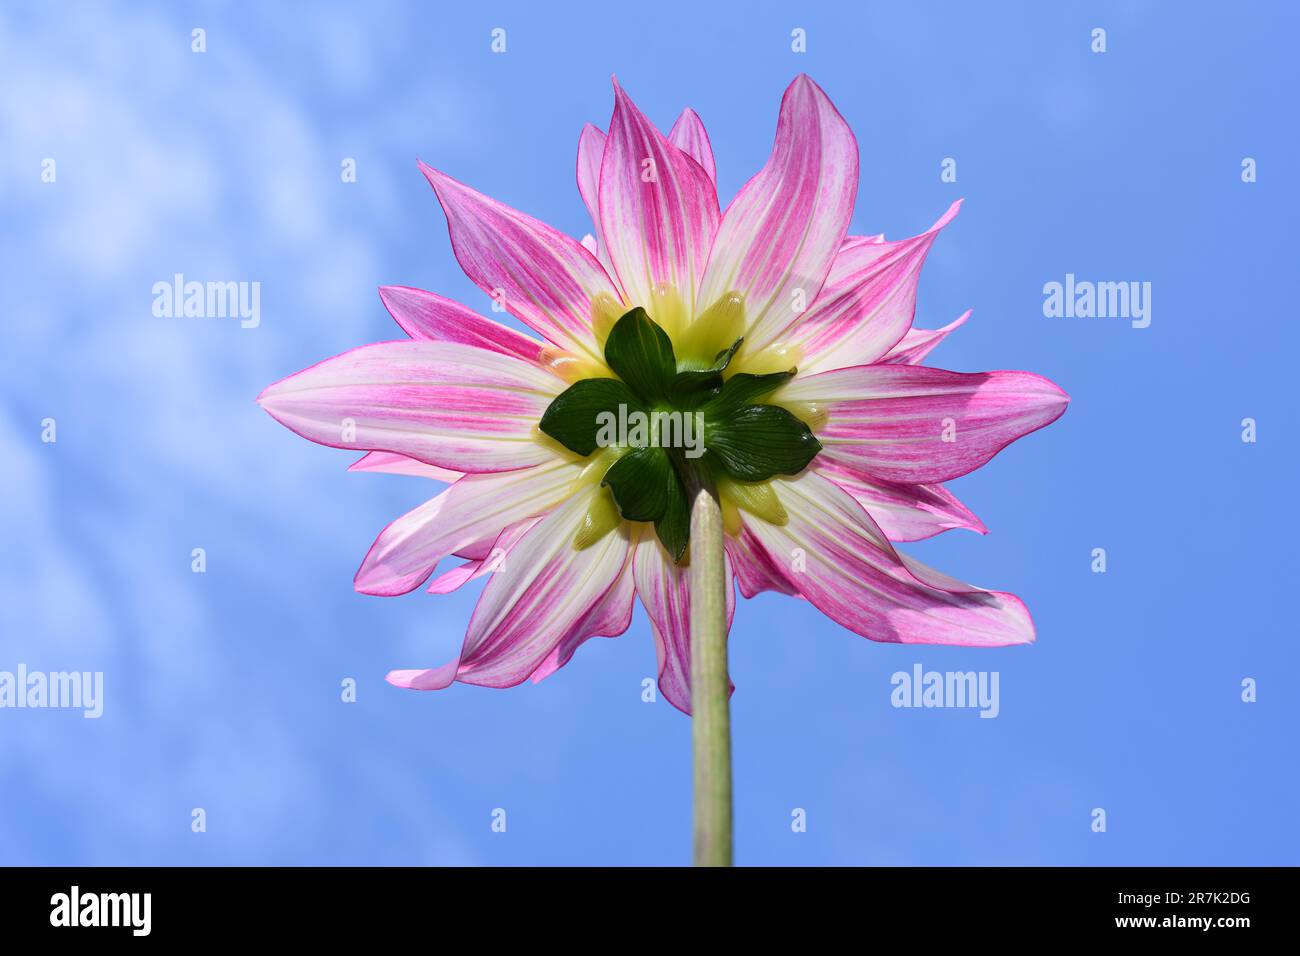 Closeup on underside of a pink and yellow columbine Dahlia flower on blue sky background Stock Photo